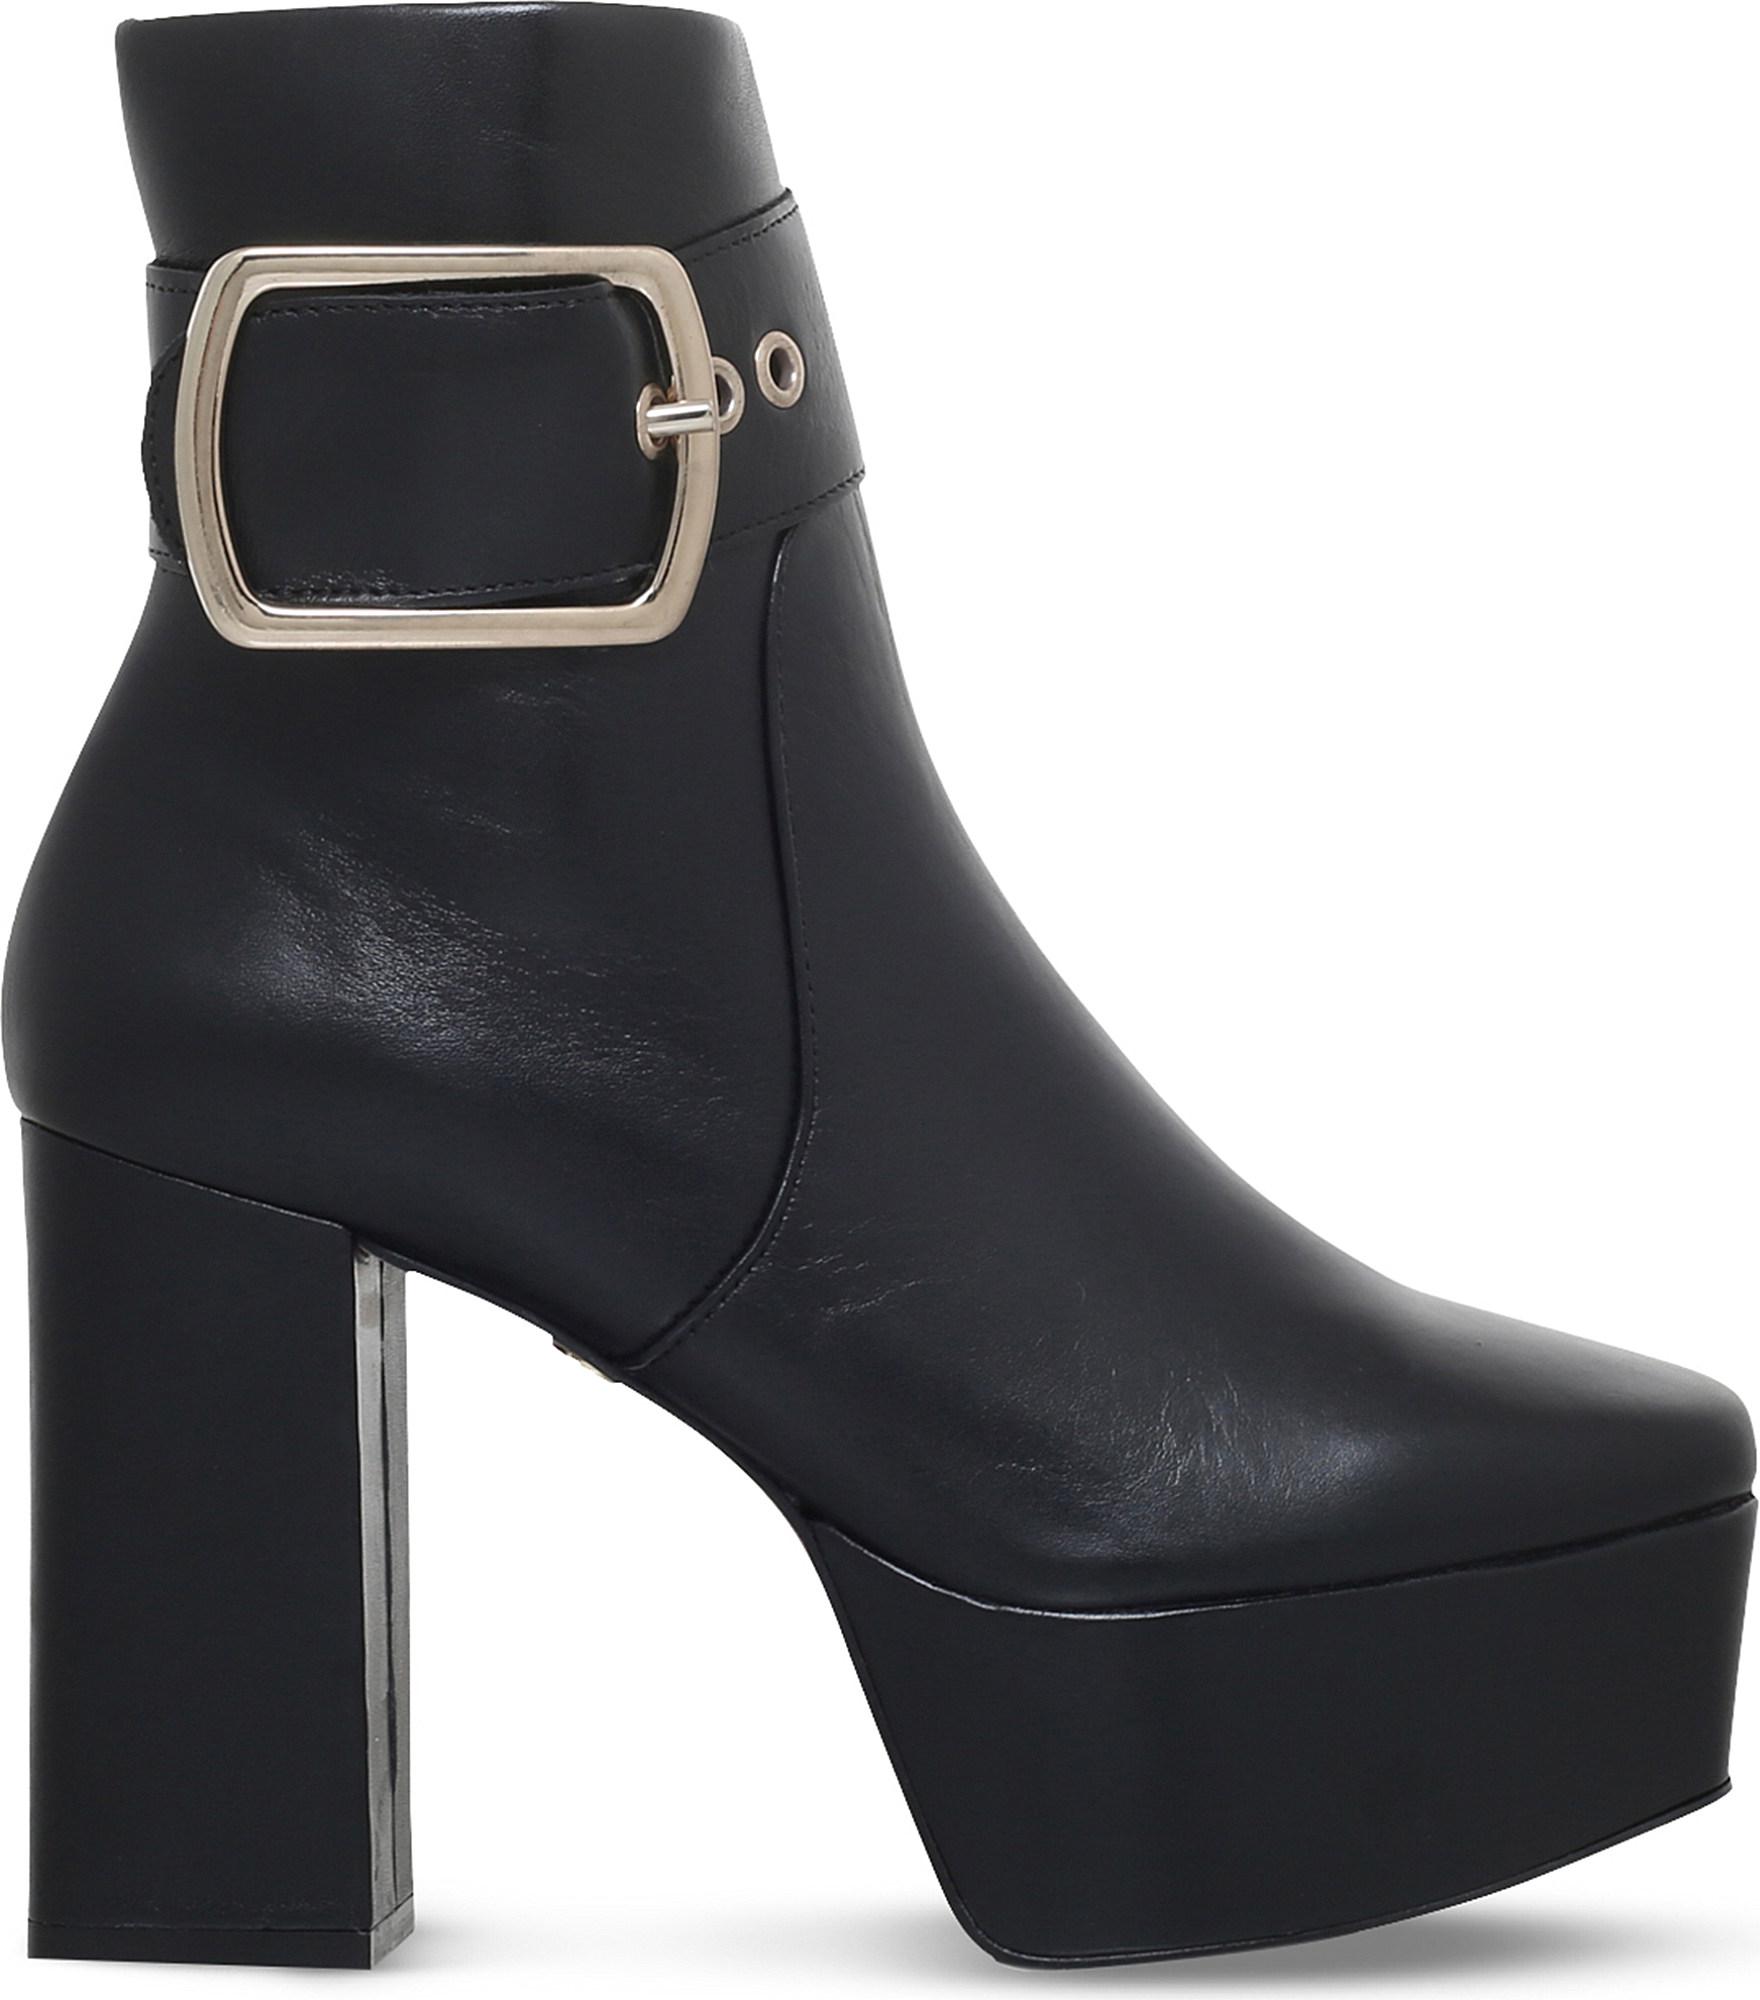 KG by Kurt Geiger Spritz Leather Ankle Boots in Black - Lyst